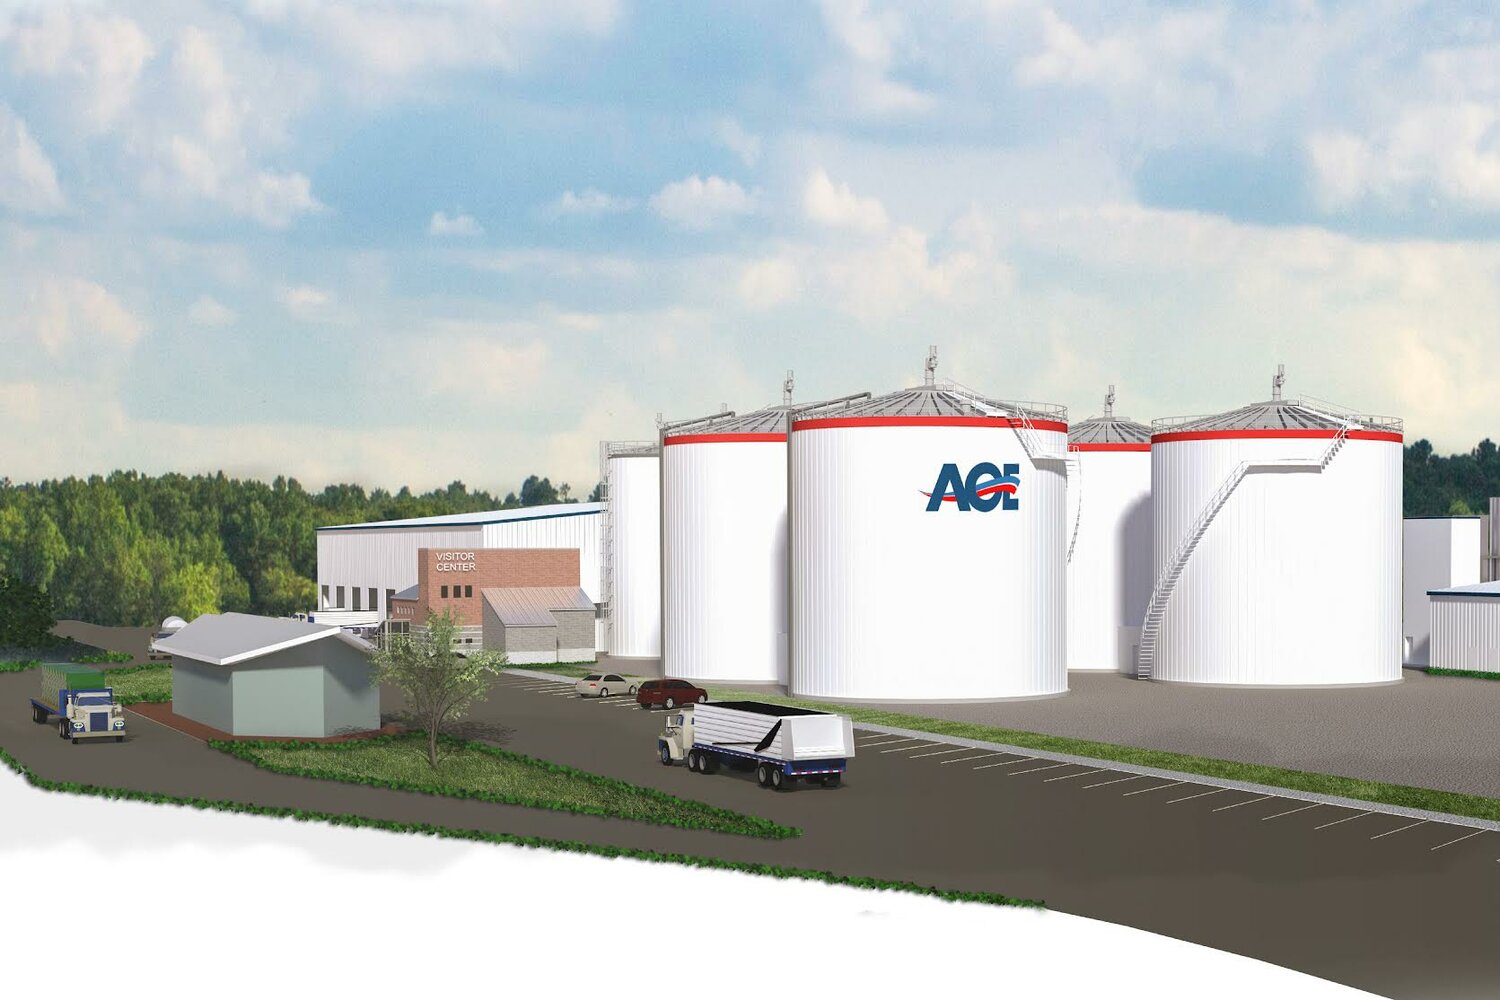 American Organic Energy expects to open its waste-to-energy plant in Yaphank by the end of 2024. Rendering provided by American Organic Energy.